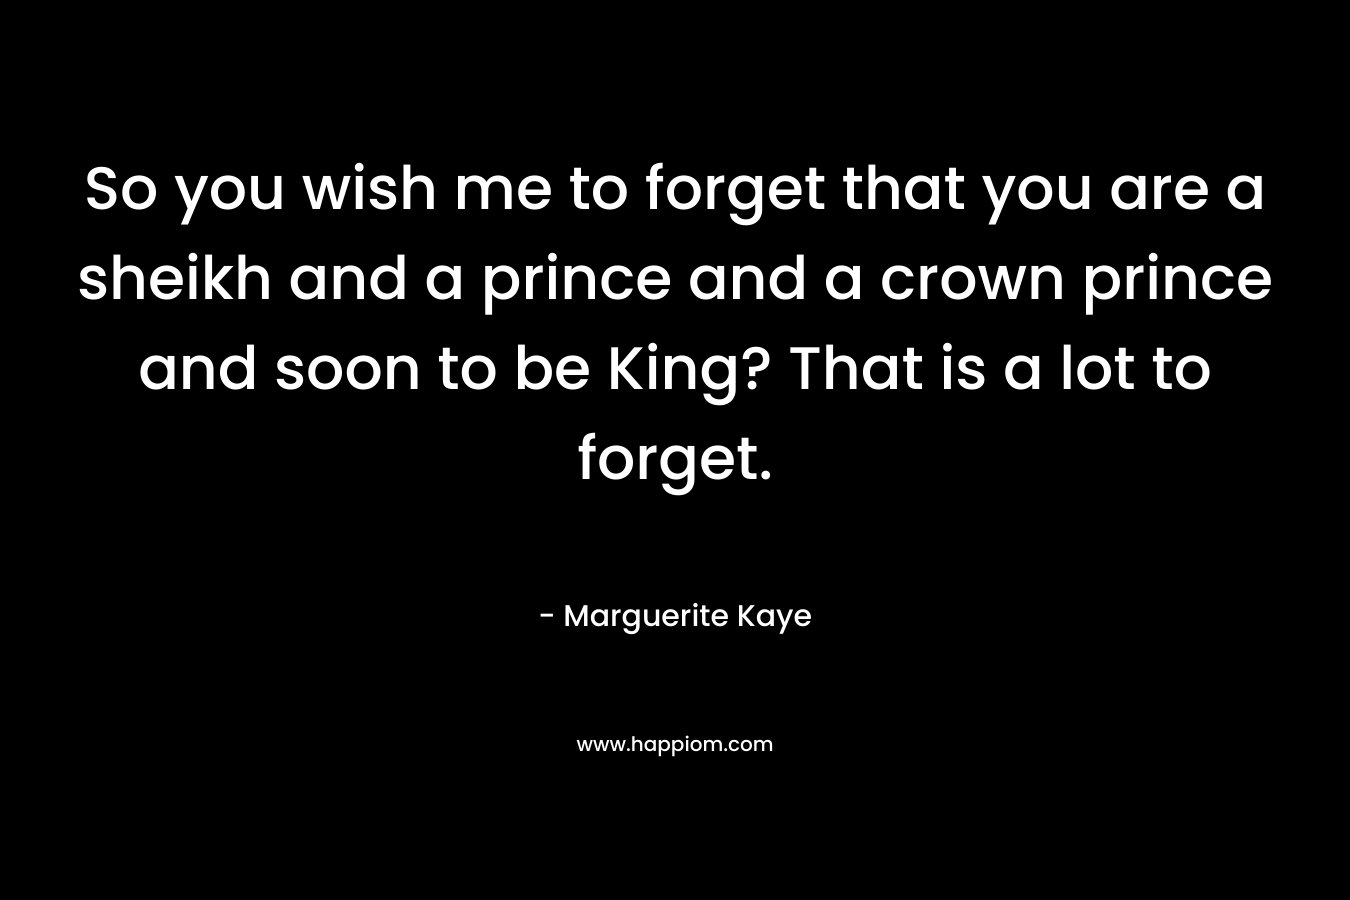 So you wish me to forget that you are a sheikh and a prince and a crown prince and soon to be King? That is a lot to forget. – Marguerite Kaye